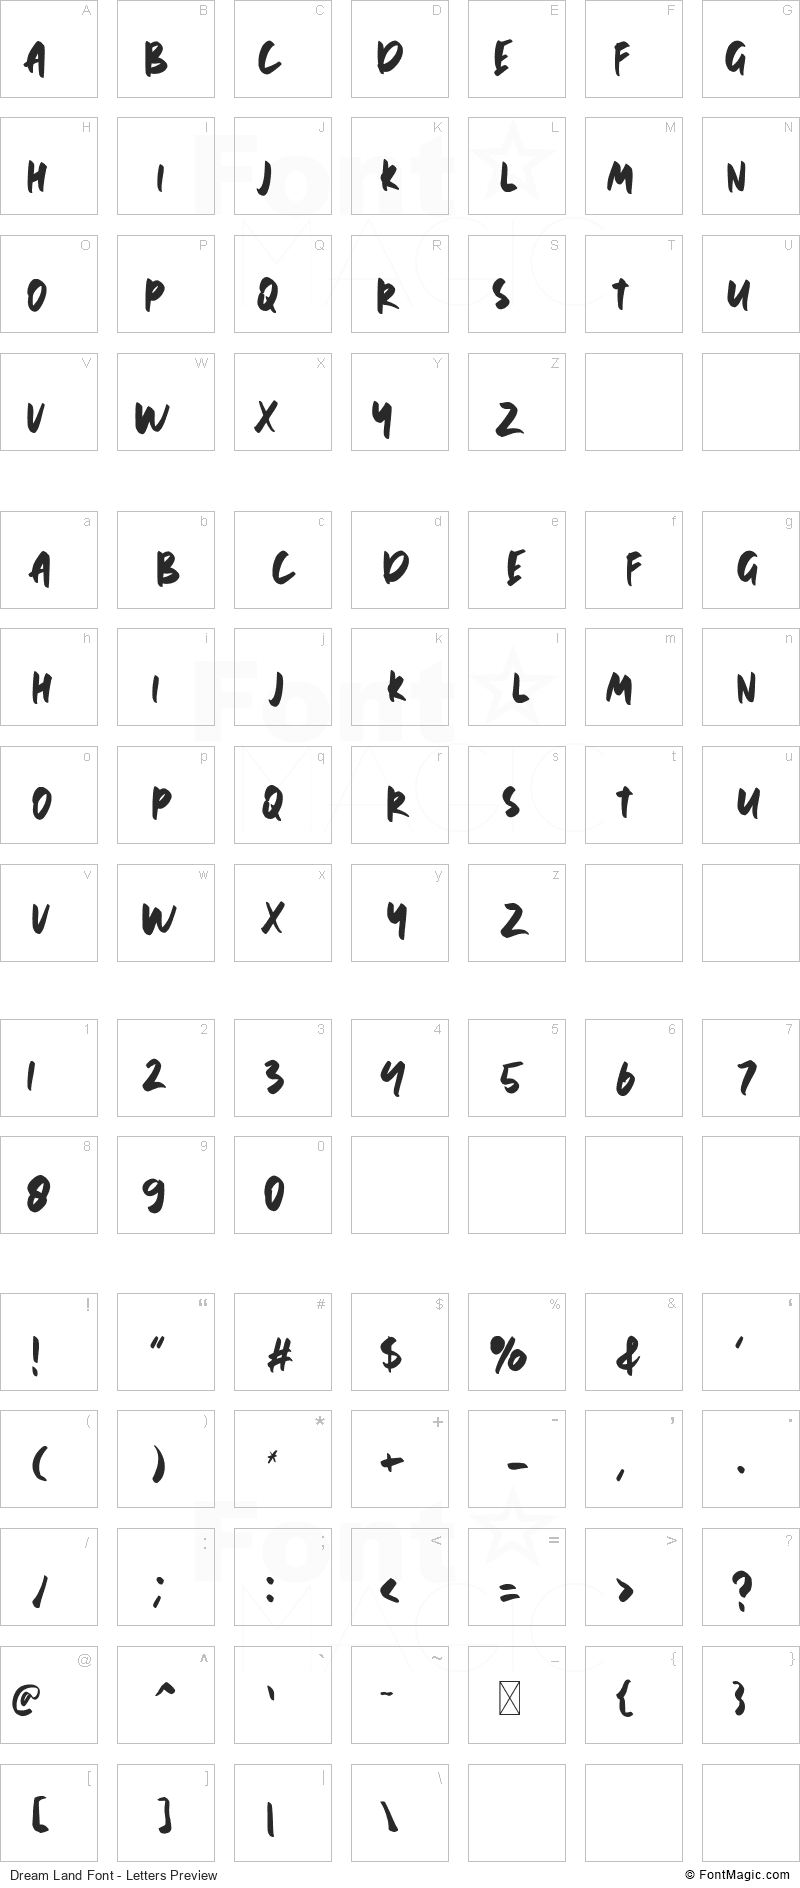 Dream Land Font - All Latters Preview Chart